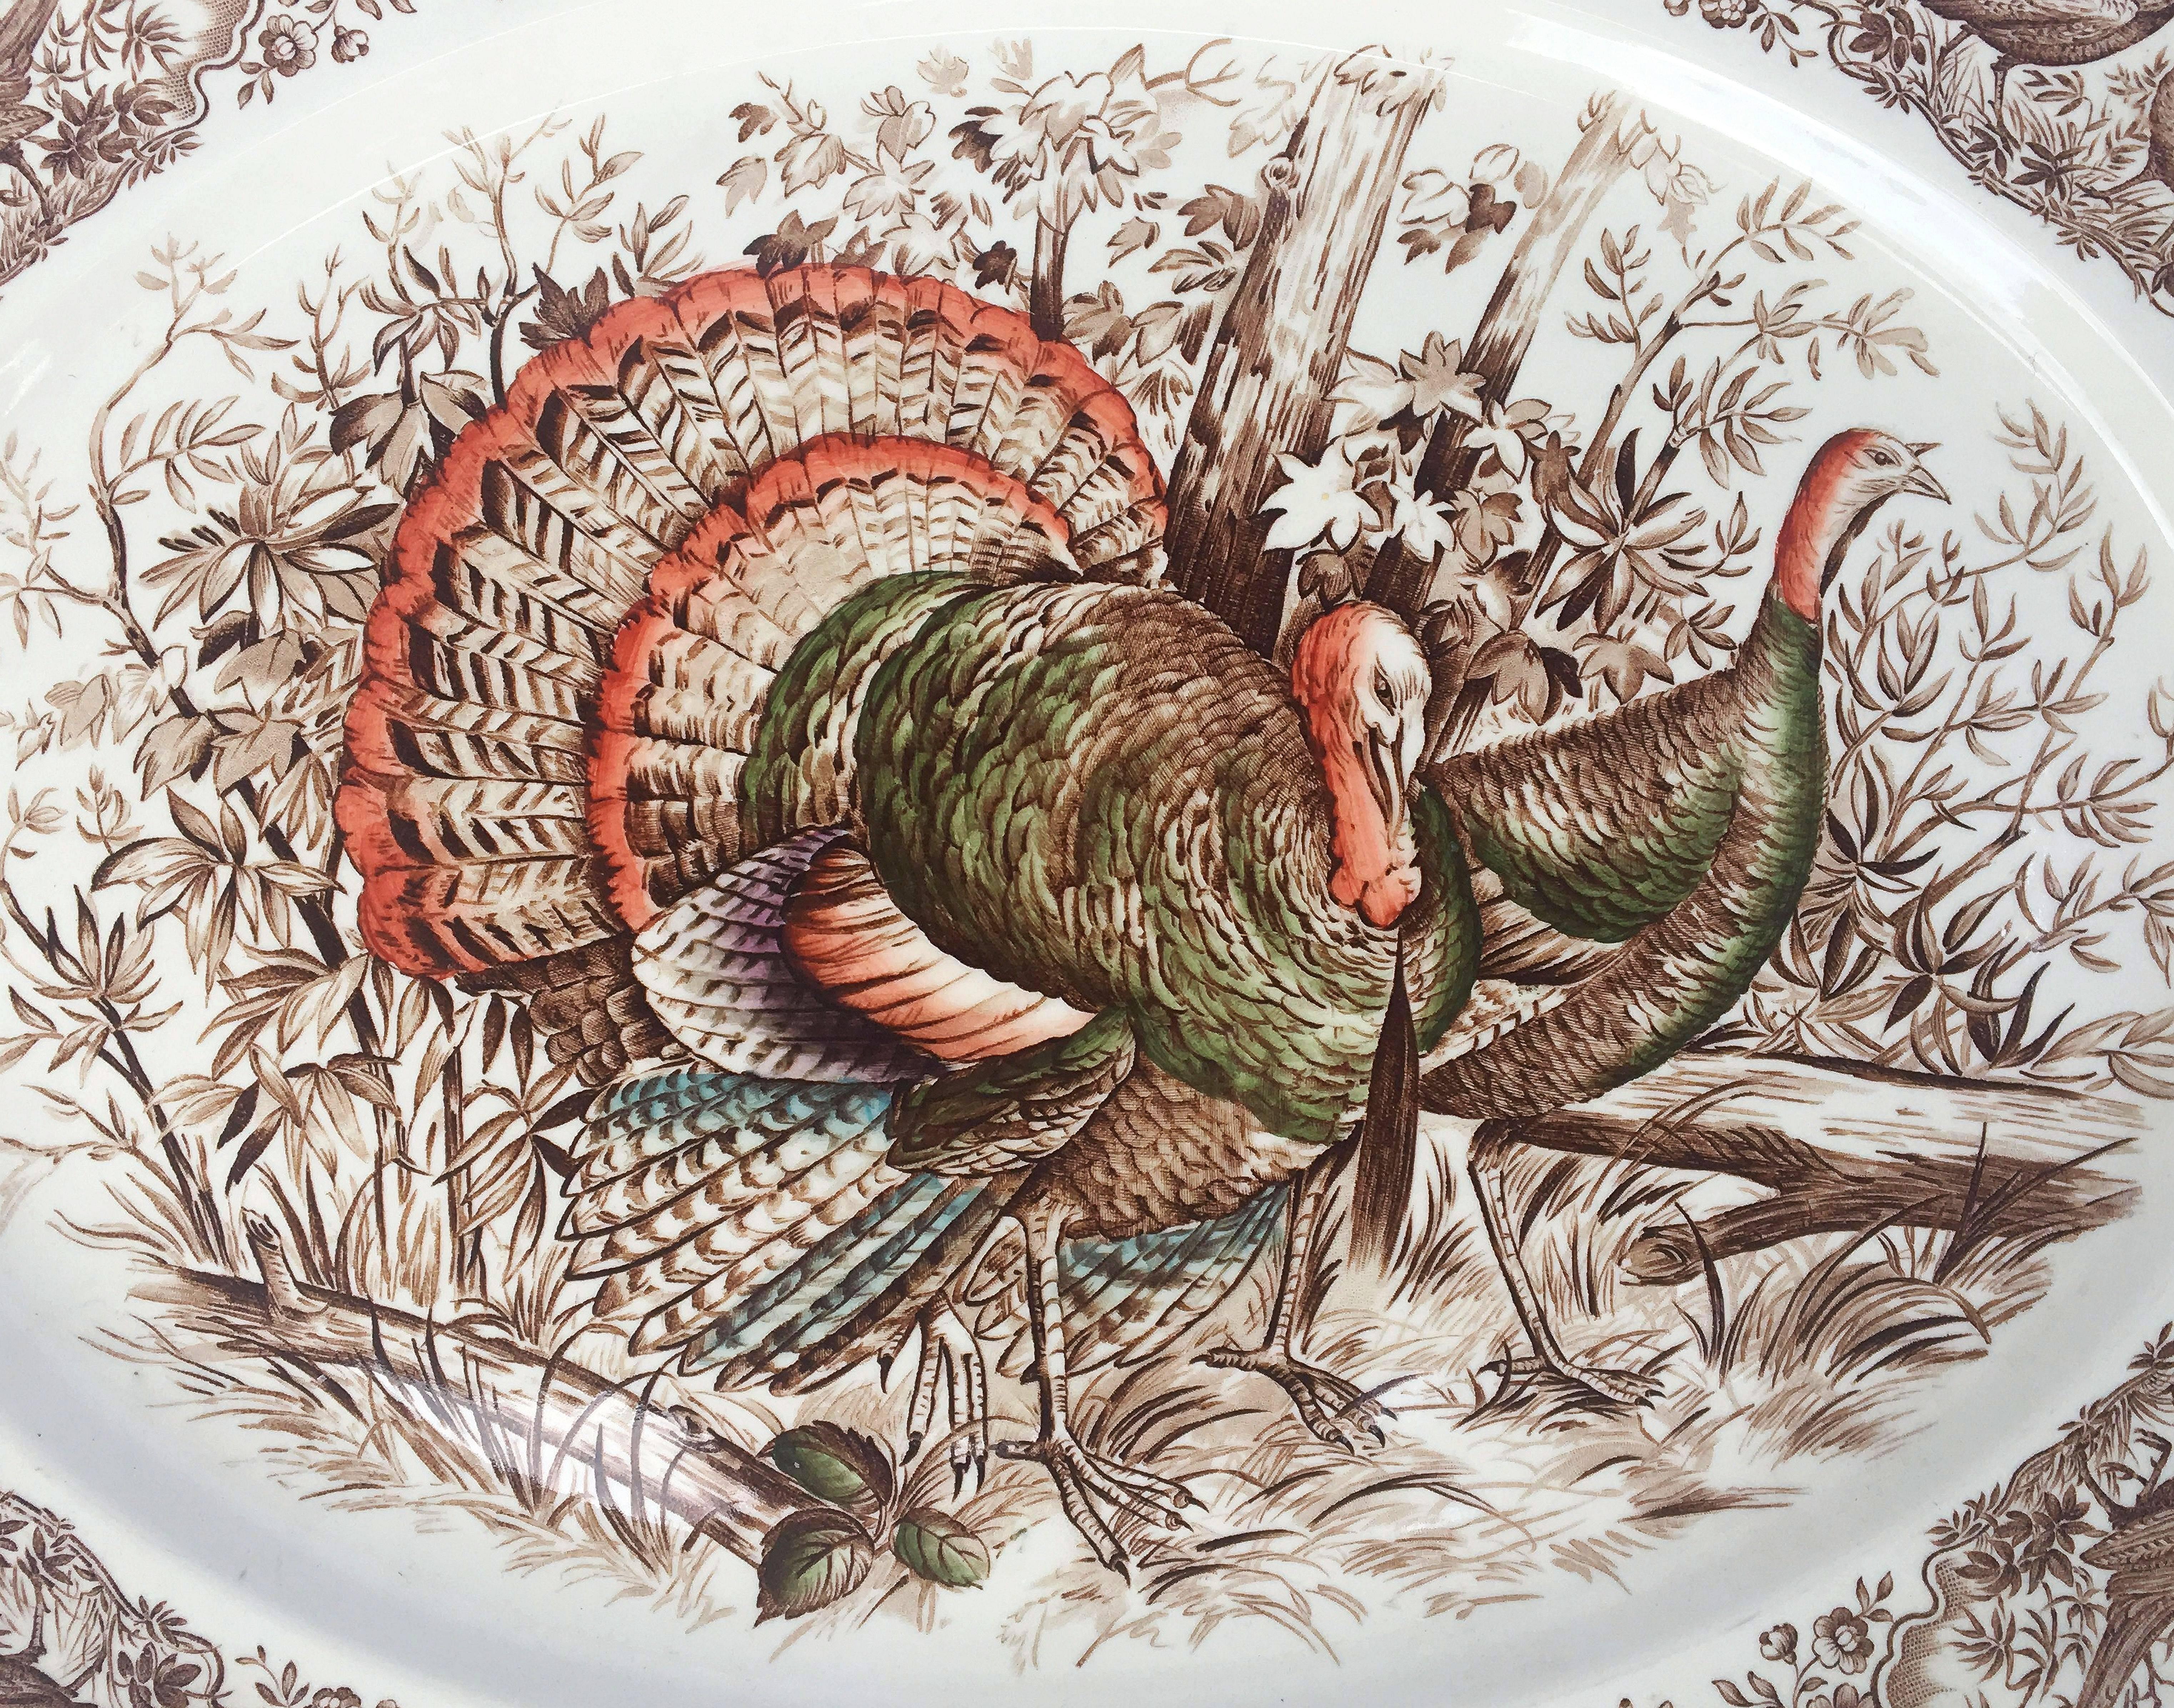 A large vintage serving platter featuring the Wild Turkey, Native American brown and white transfer-ware pattern by the celebrated English pottery firm, Johnson Brothers.

With authentic midcentury brown label on reverse.

Perfect for the